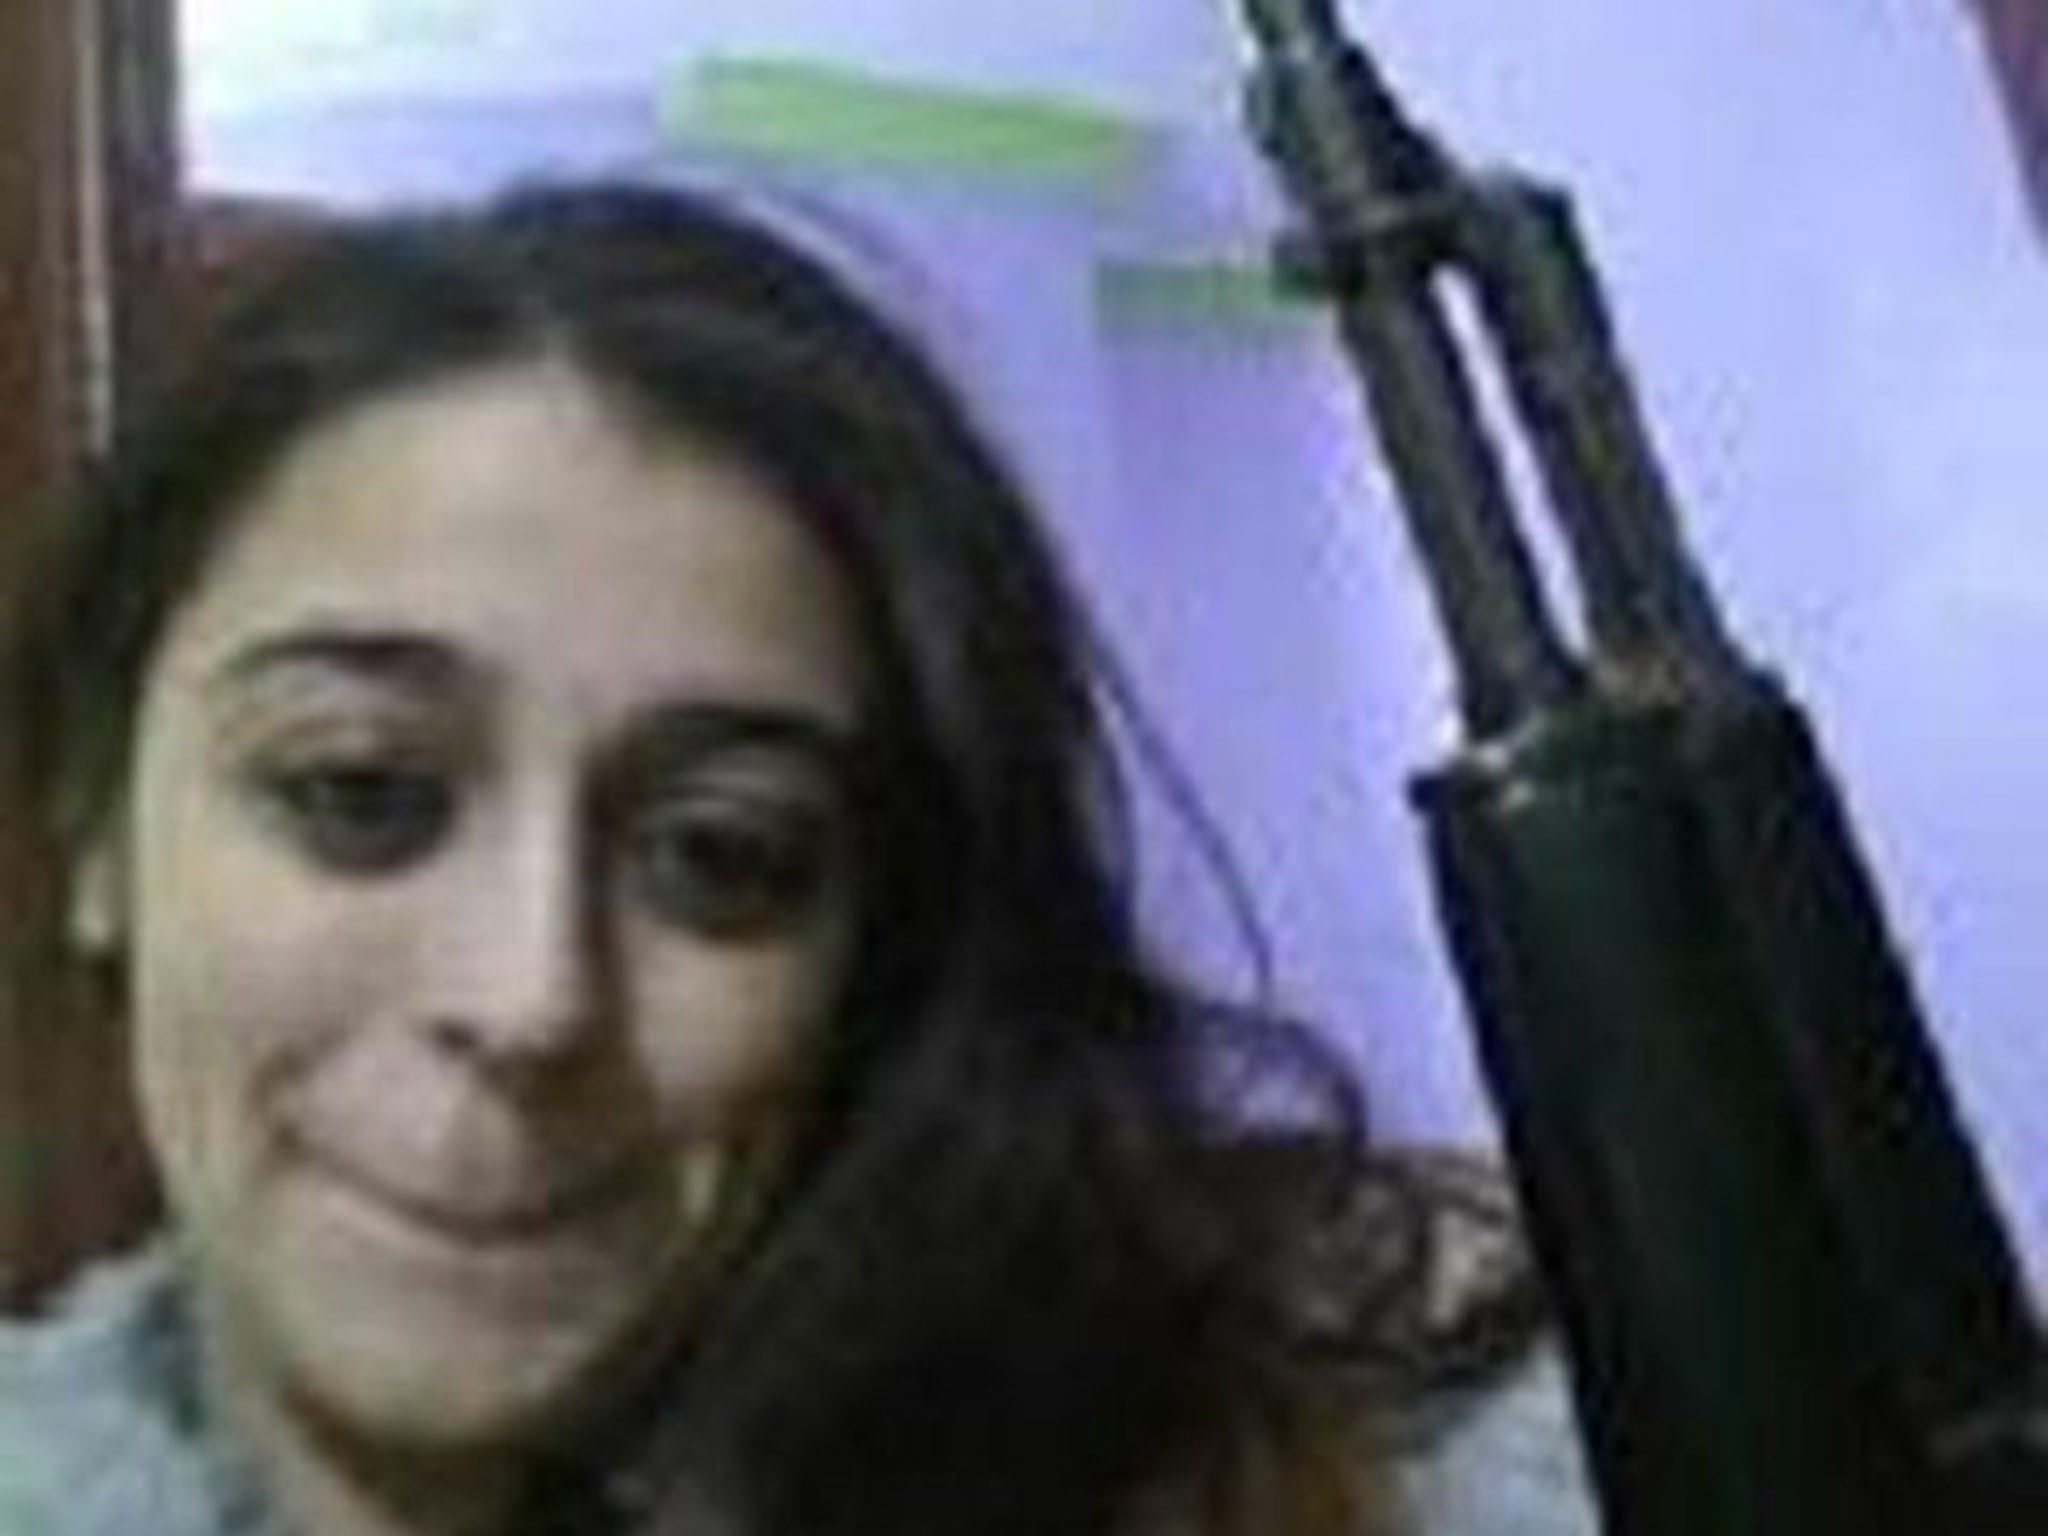 A deleted picture on Shakil's phone showing her with an AK 47